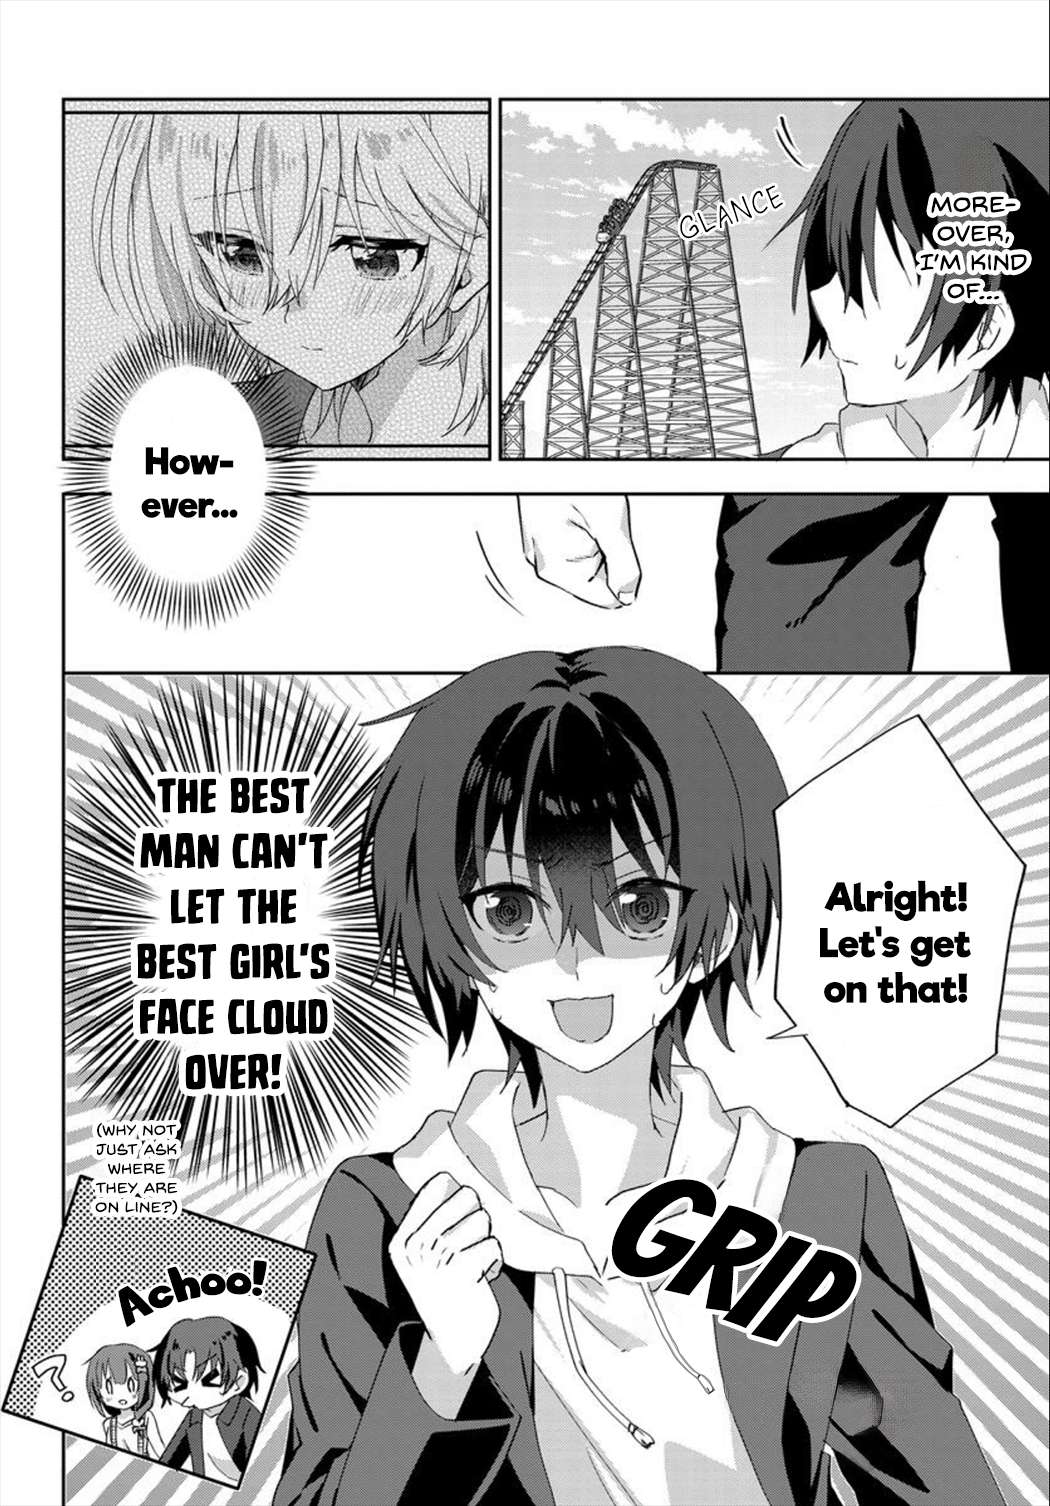 Since I’Ve Entered The World Of Romantic Comedy Manga, I’Ll Do My Best To Make The Losing Heroine Happy - chapter 7.1 - #4